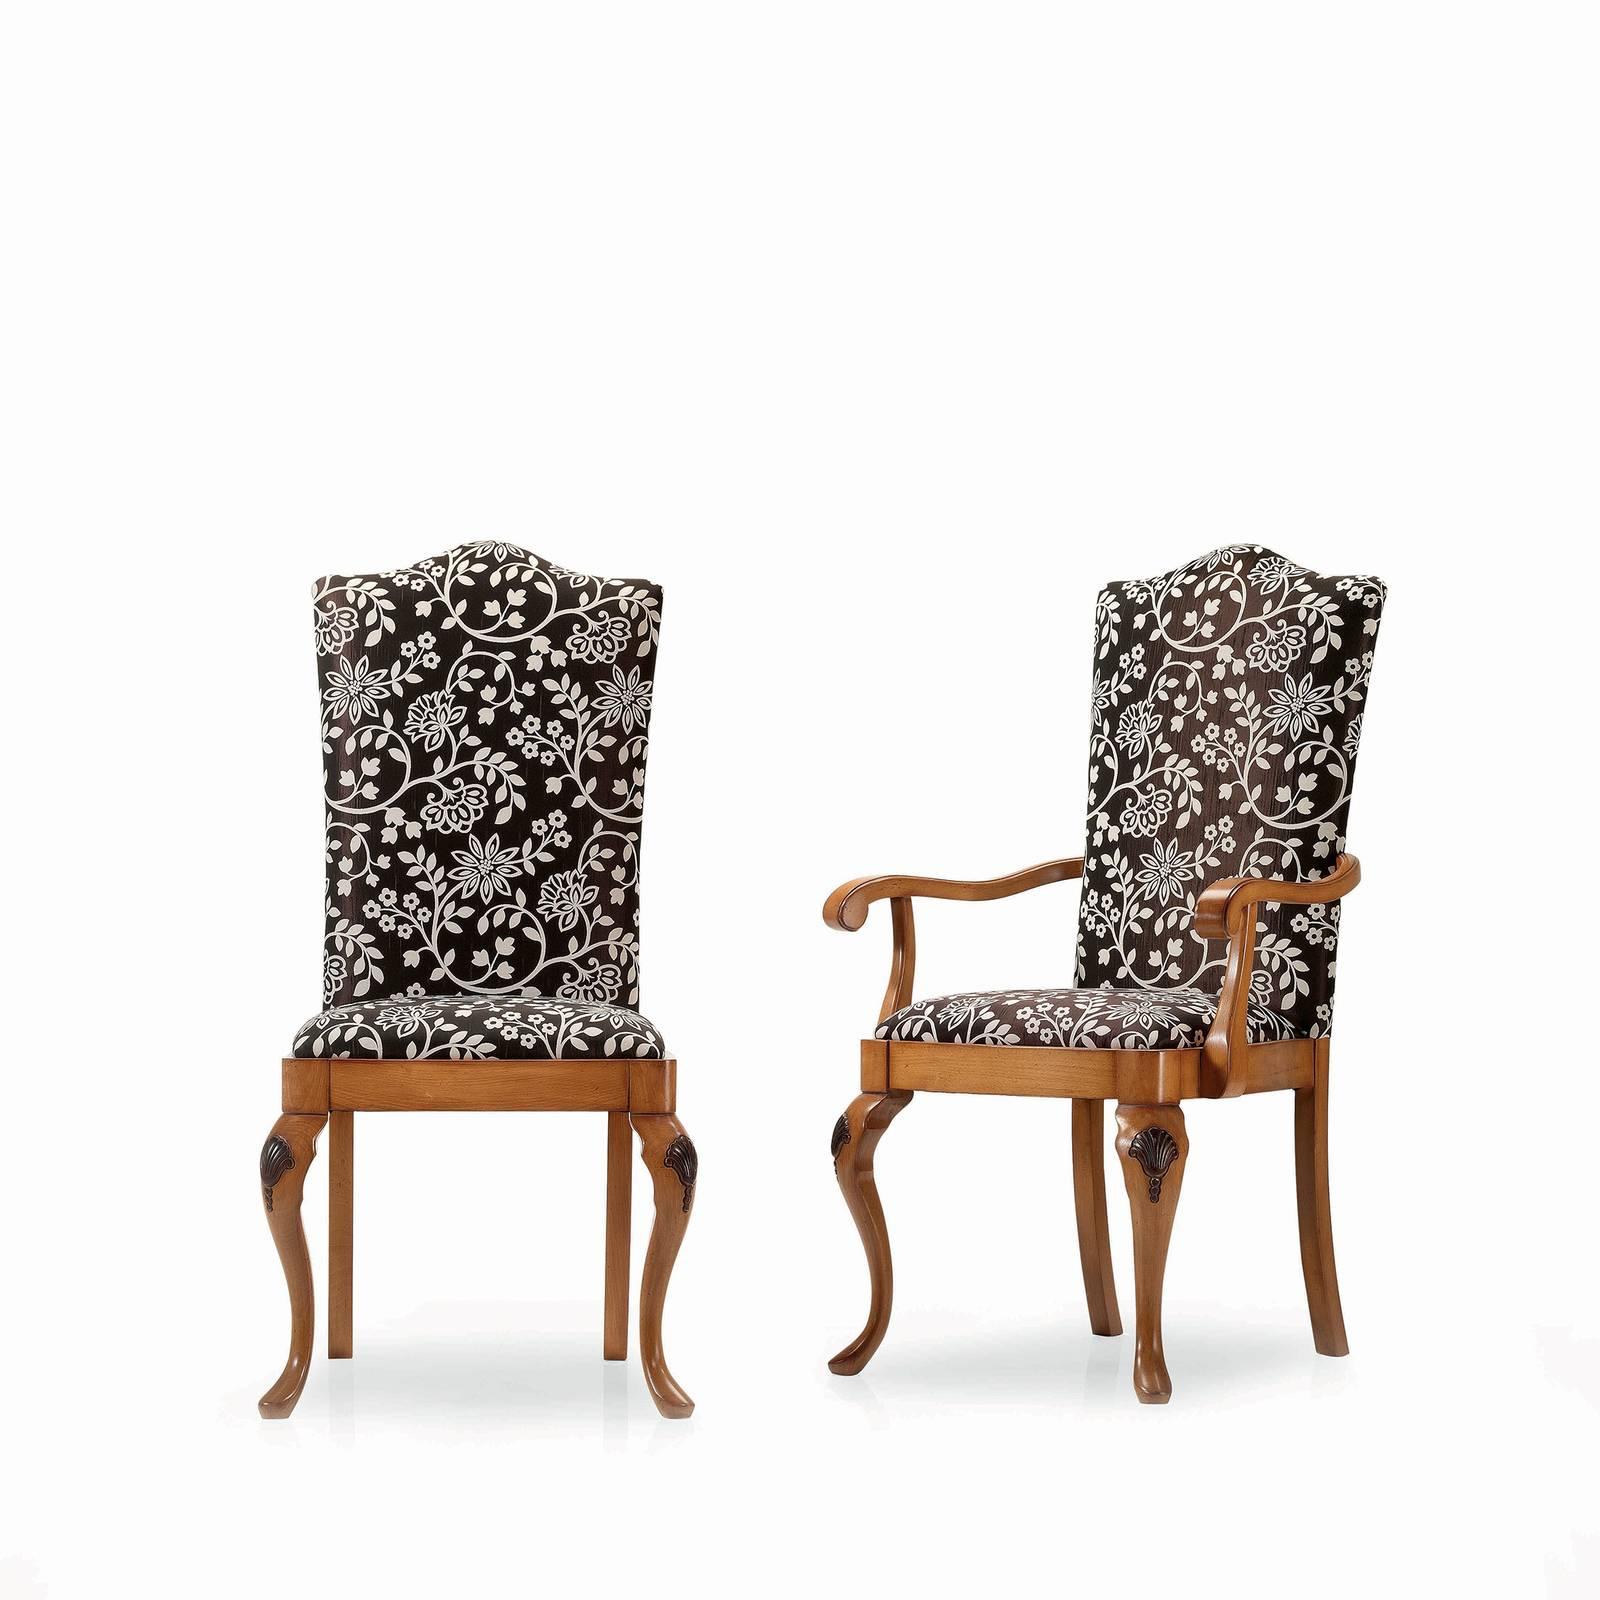 A modern take on a classic Rococo style, this chair is an ideal accent for a living room, study, or bedroom decor. Fashioned entirely of wood, it is crafted in the Queen Anne style, evident in the scalloped top rail, tall back, curved armrests, and